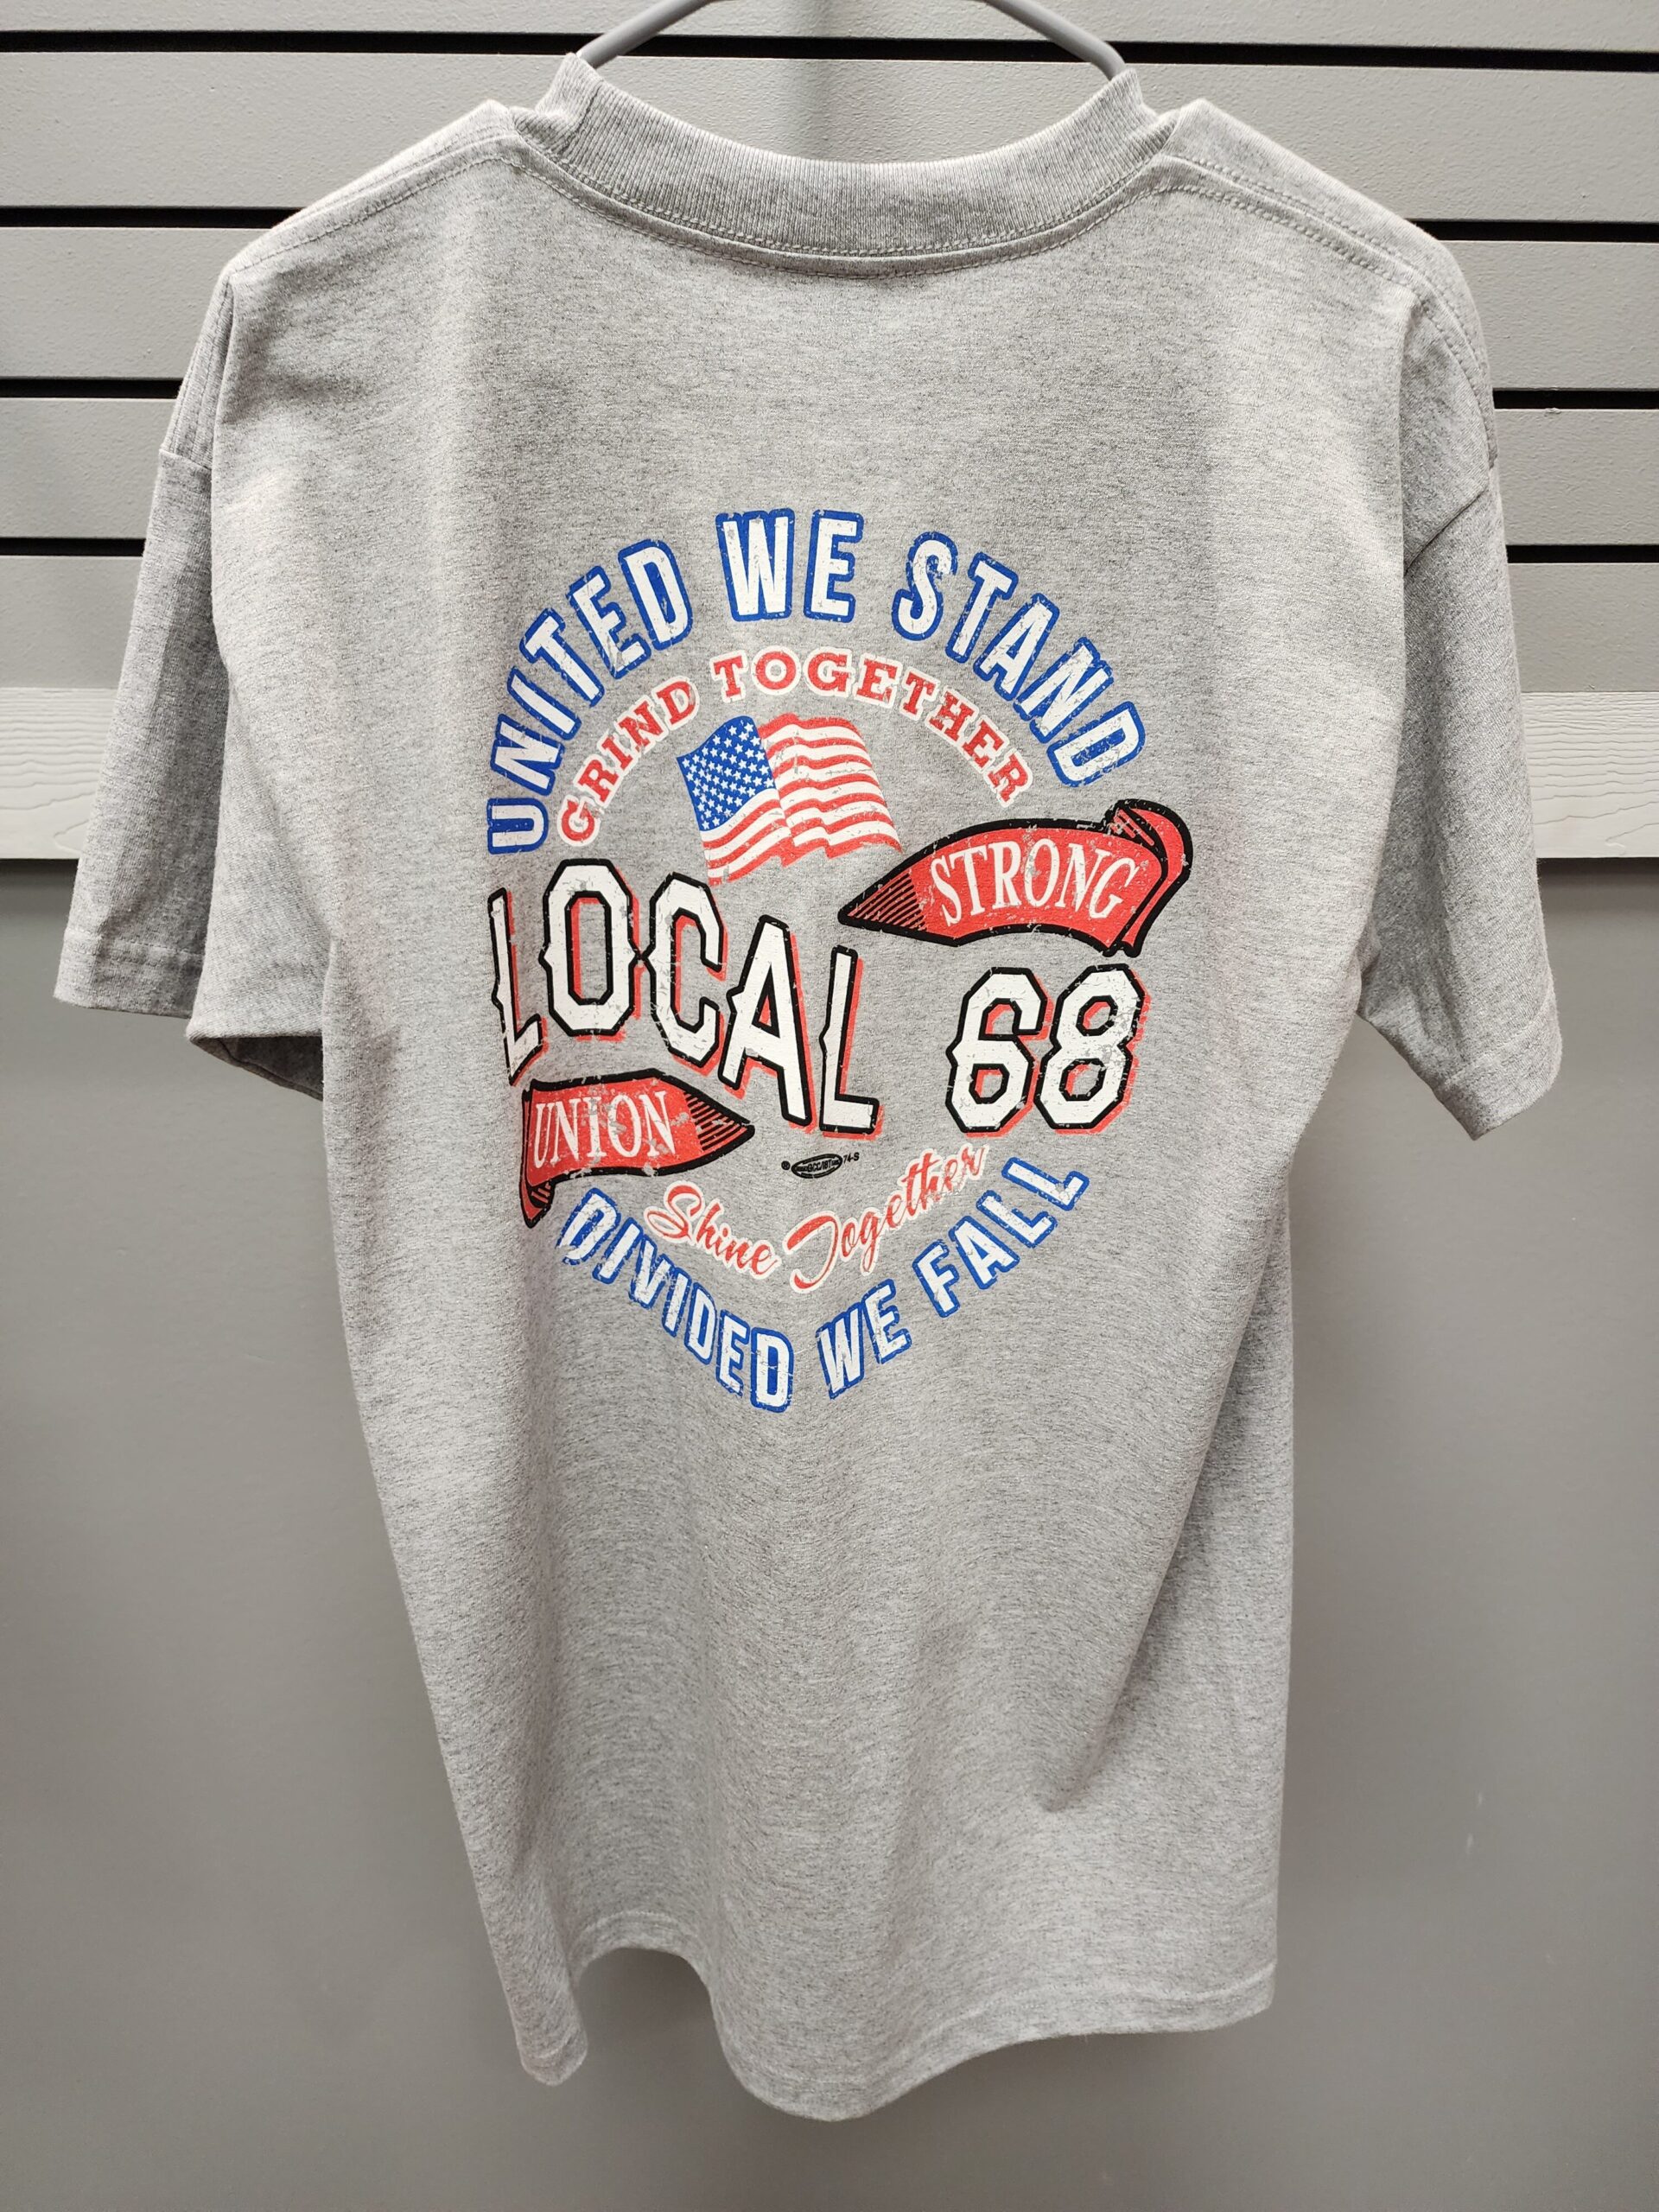 Merchandise – MN State Interior Systems Local 68